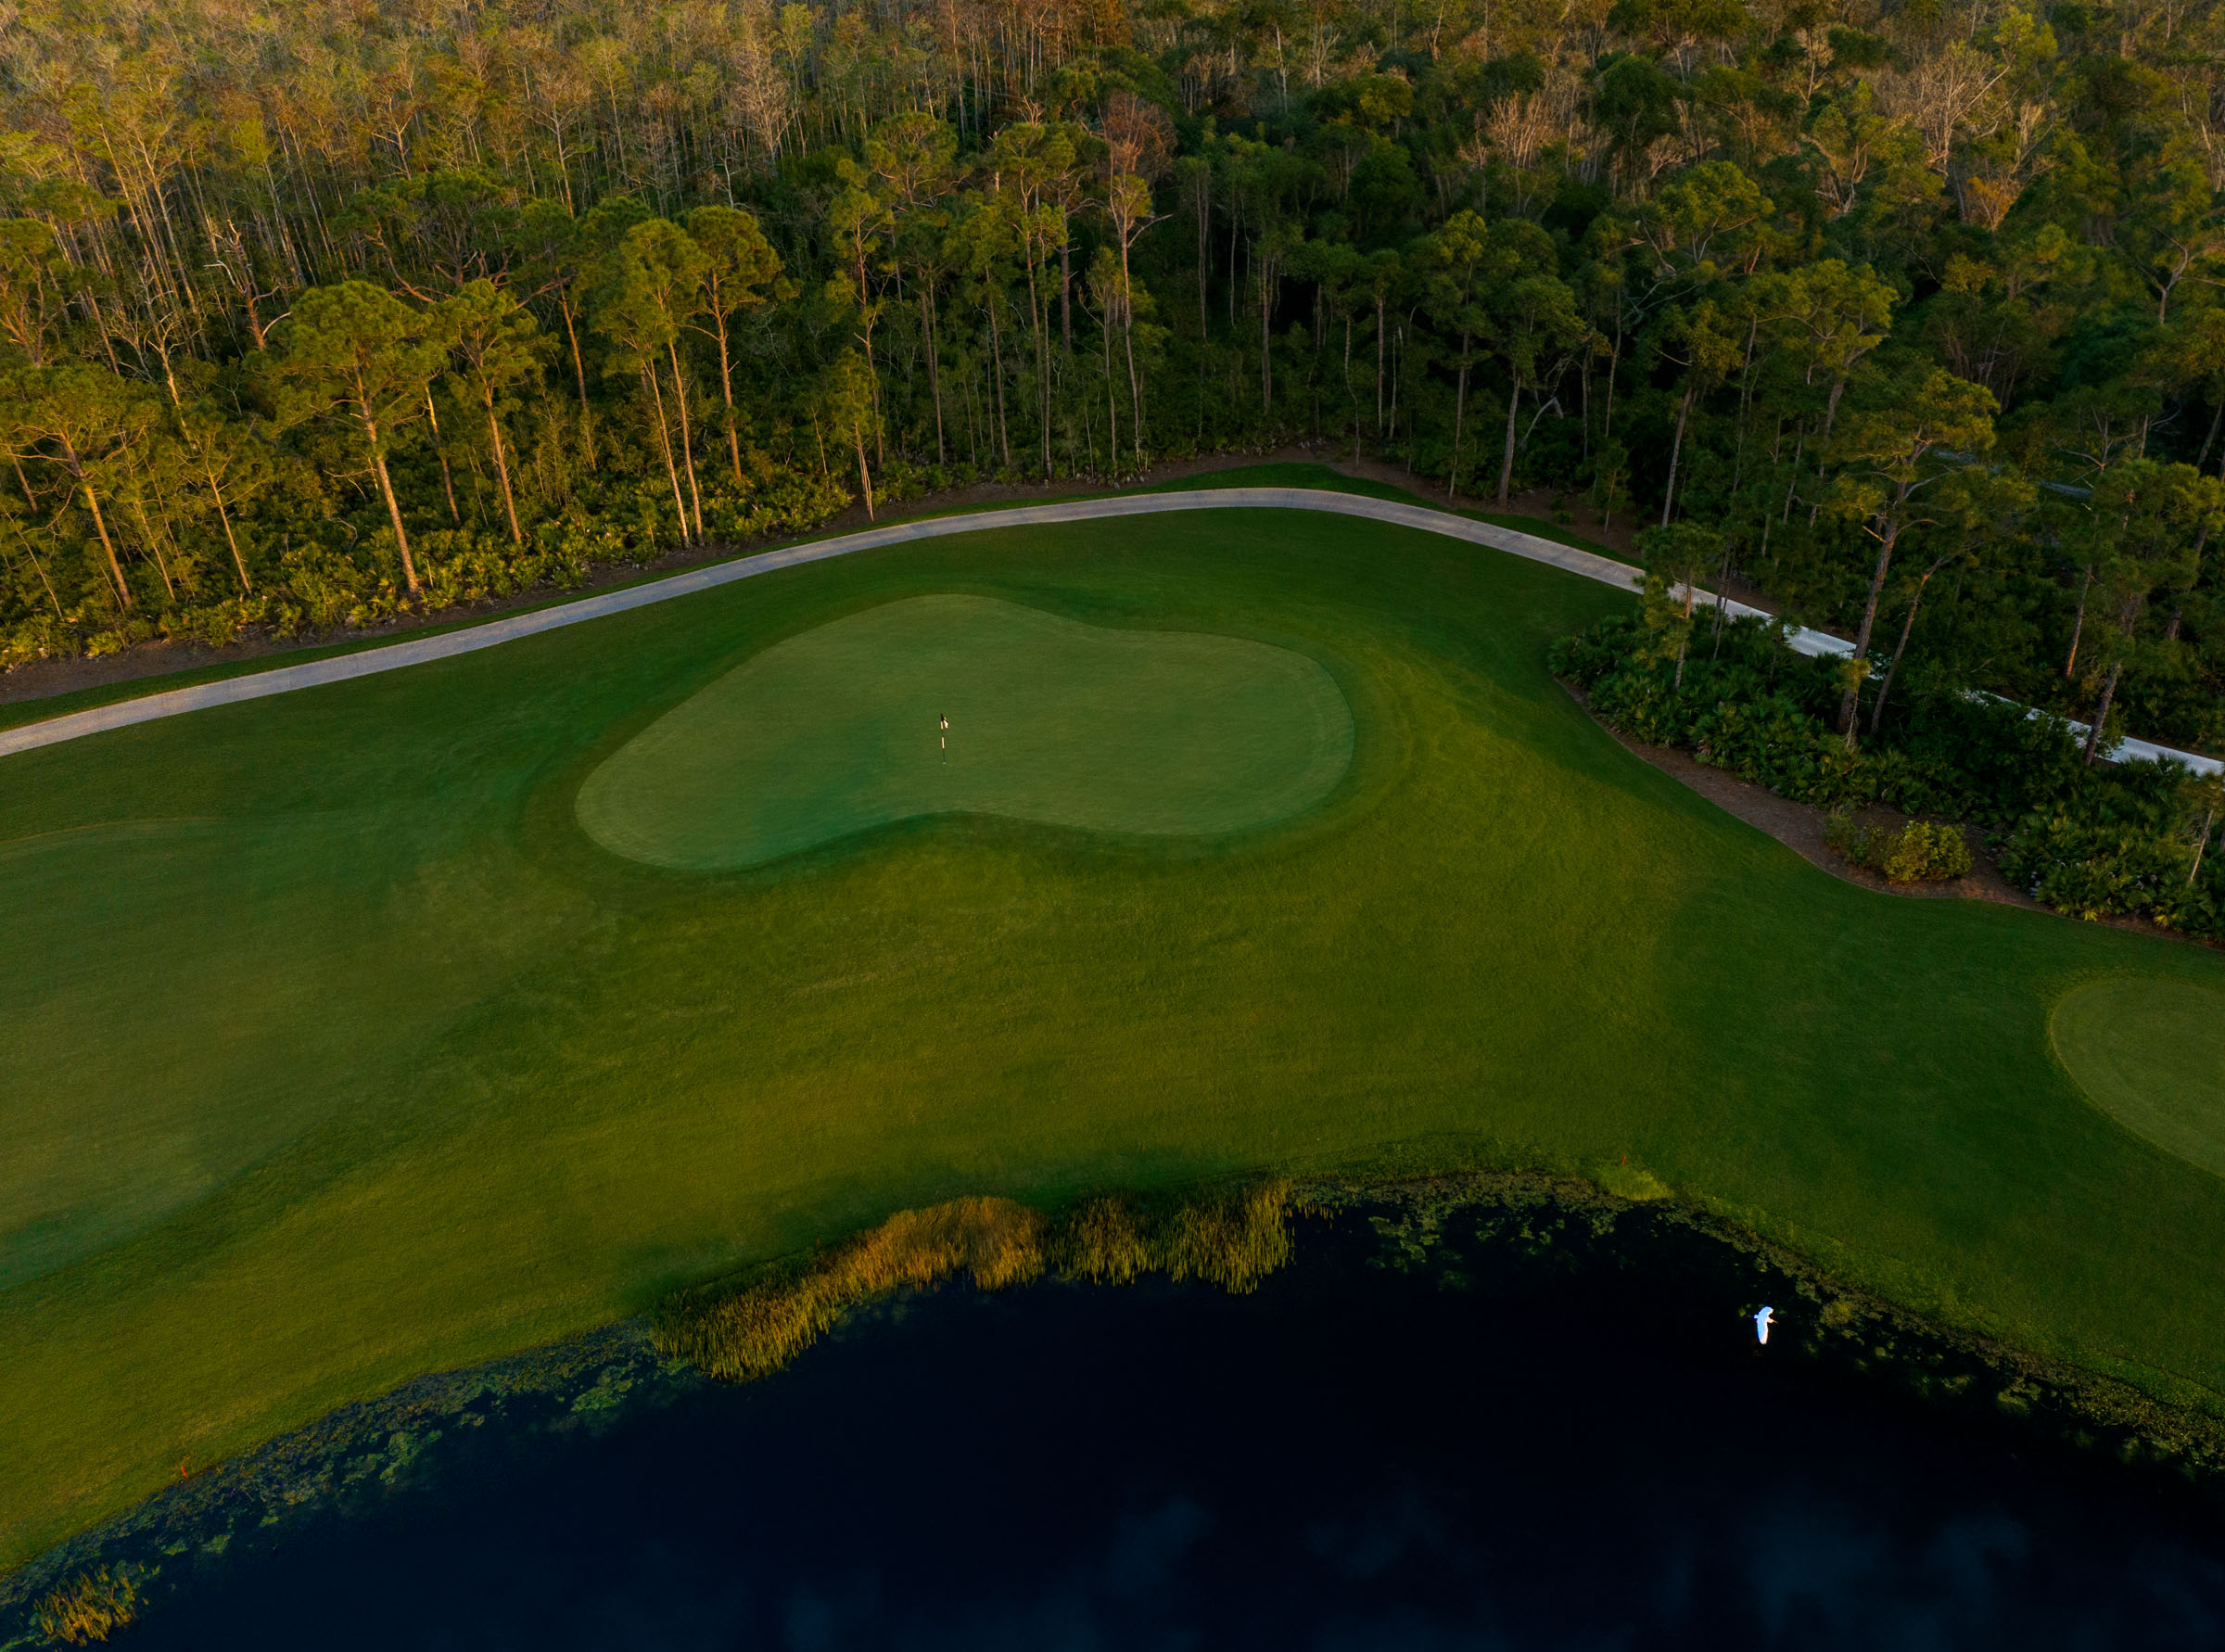 Aerial view of a golf green surrounded by trees, with a golf hole flag in the center. A cart path runs nearby, and a body of water borders the bottom edge of the image.